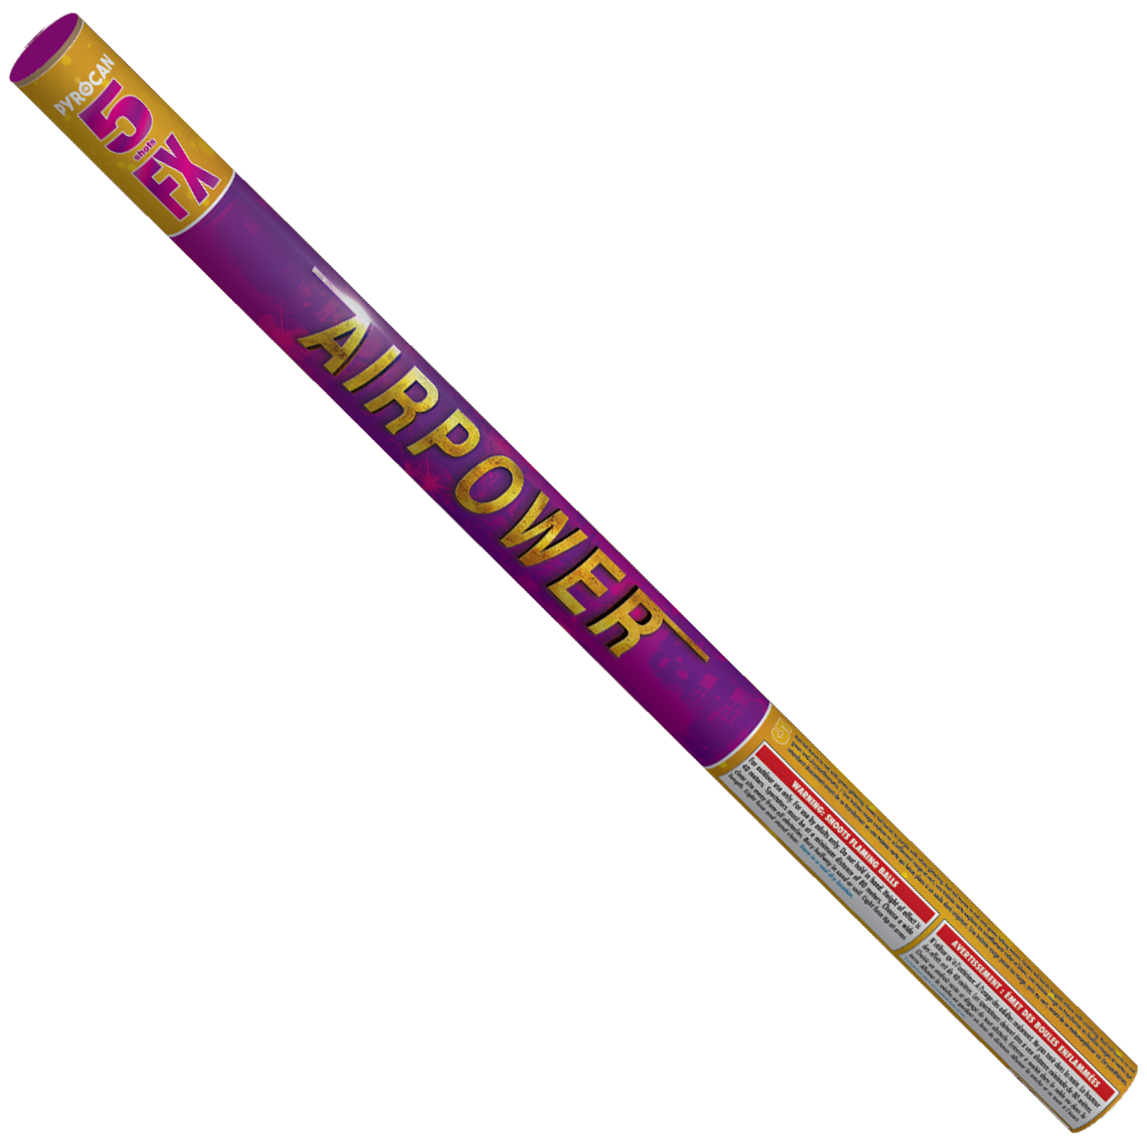 Buy Airpower Roman Candle: Rocket Fireworks Canada